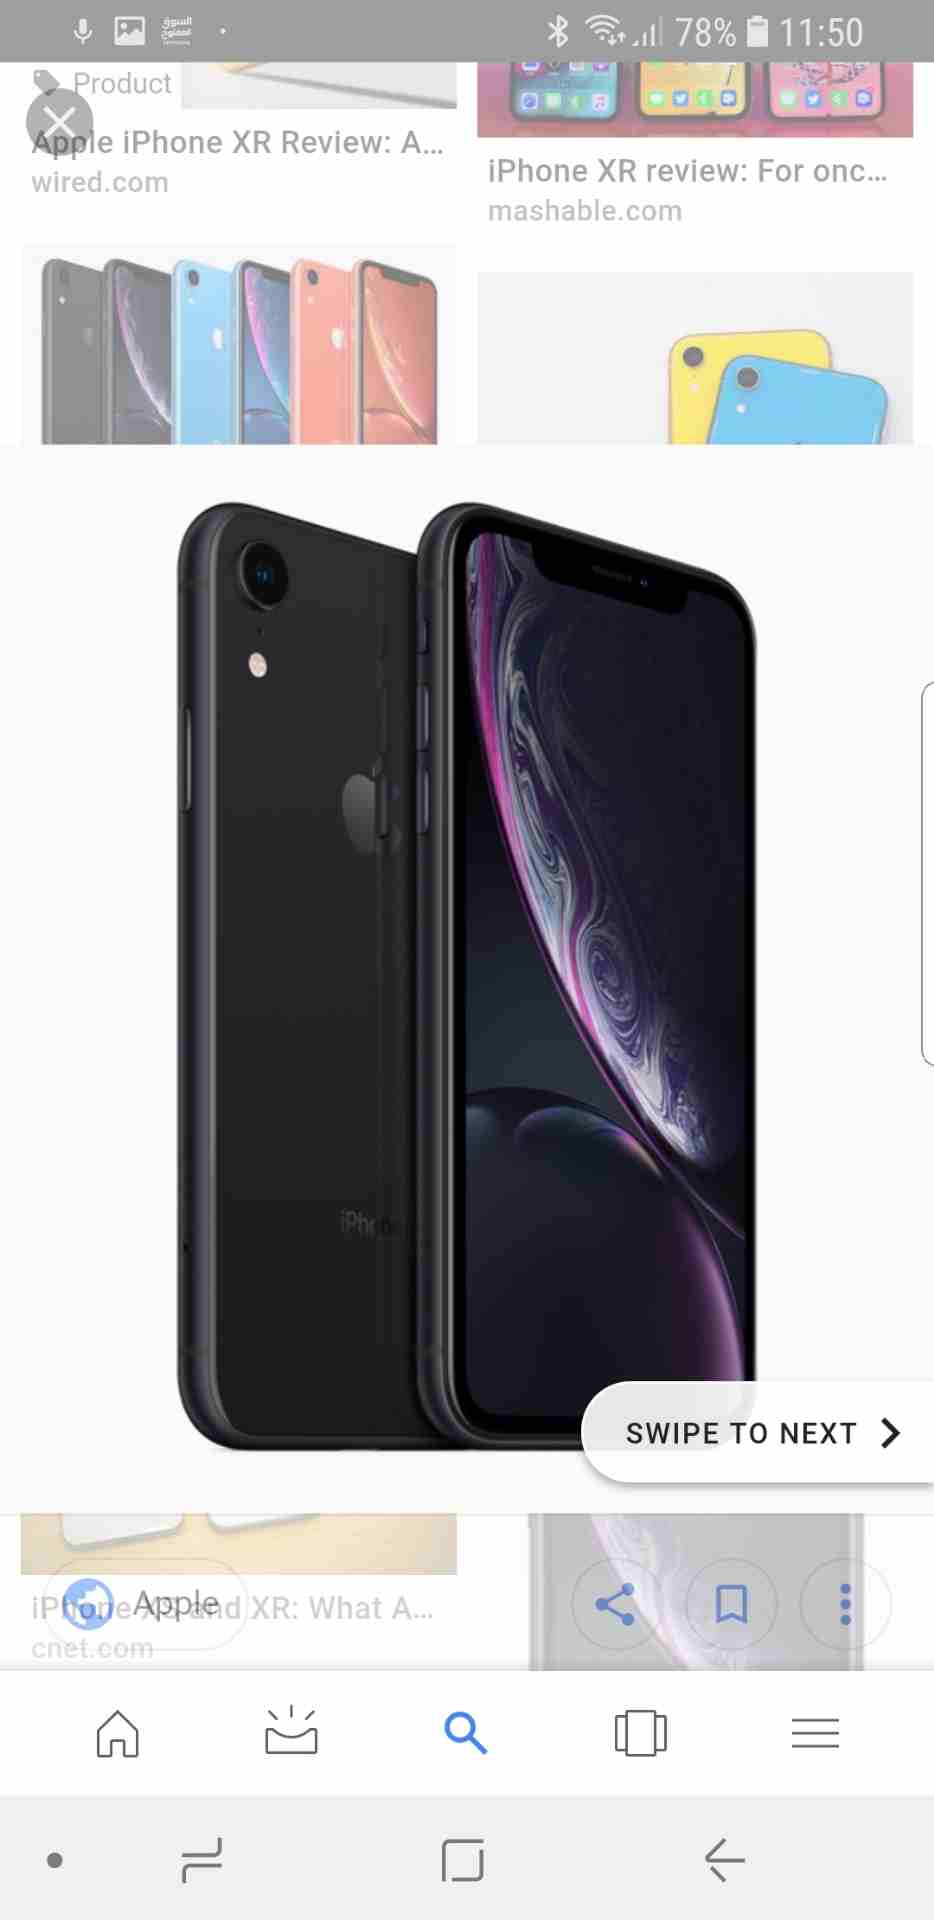 Original Apple iPhone Xs Max iPhone X Xs Xr Samsung s10 plus note9Free Gift - Apple iWatchBest price Guaranteed .wholesale OfferUnlocked SmartphonesOffer Discou-  جهاز iphone XR 64 GB...